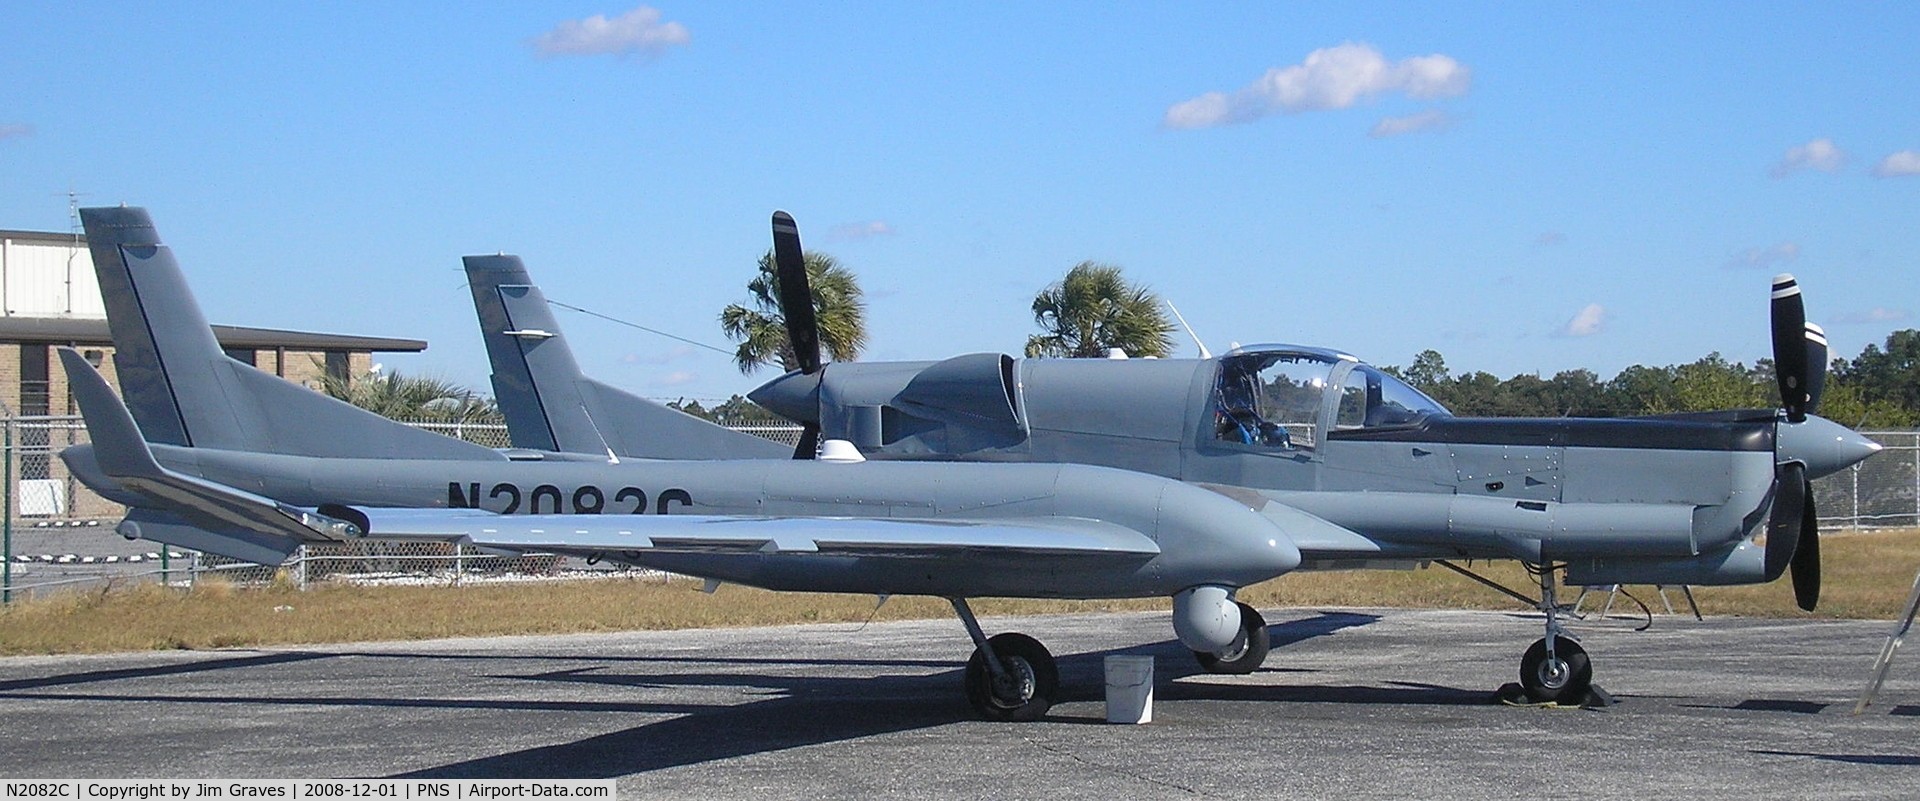 N2082C, 2005 Schweizer SA2-38B C/N 002, Notice this bird has two turboprops, not one as listed in the database.